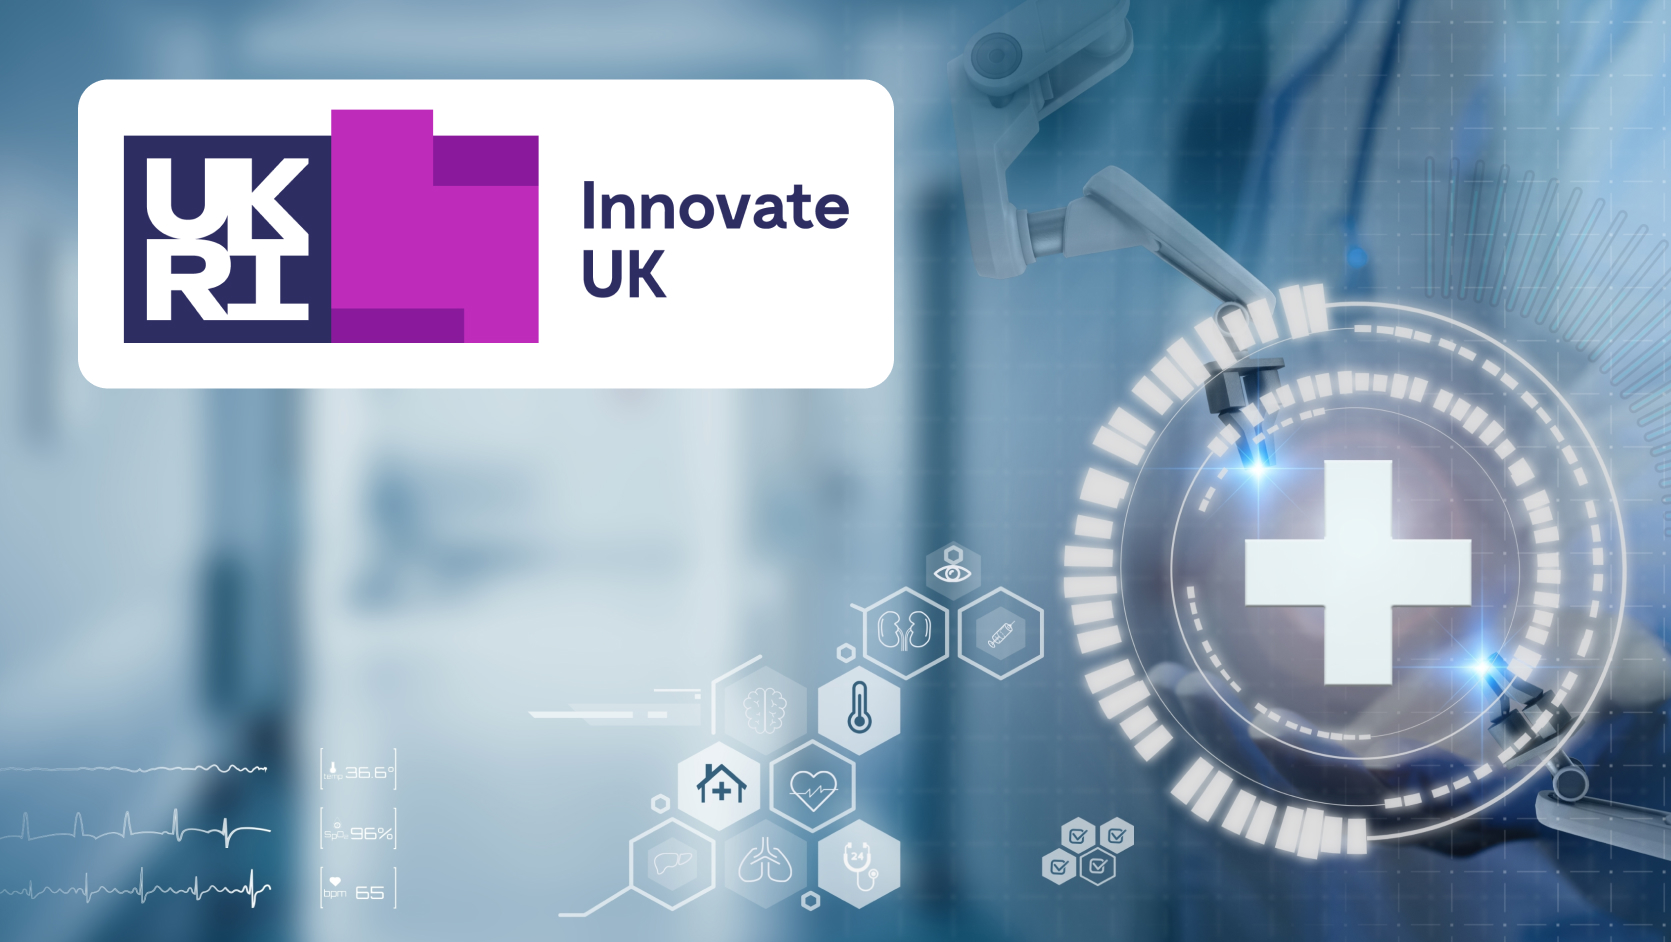 IgniteData secures £1/2 million Innovate UK grant for ground-breaking clinical trial data project